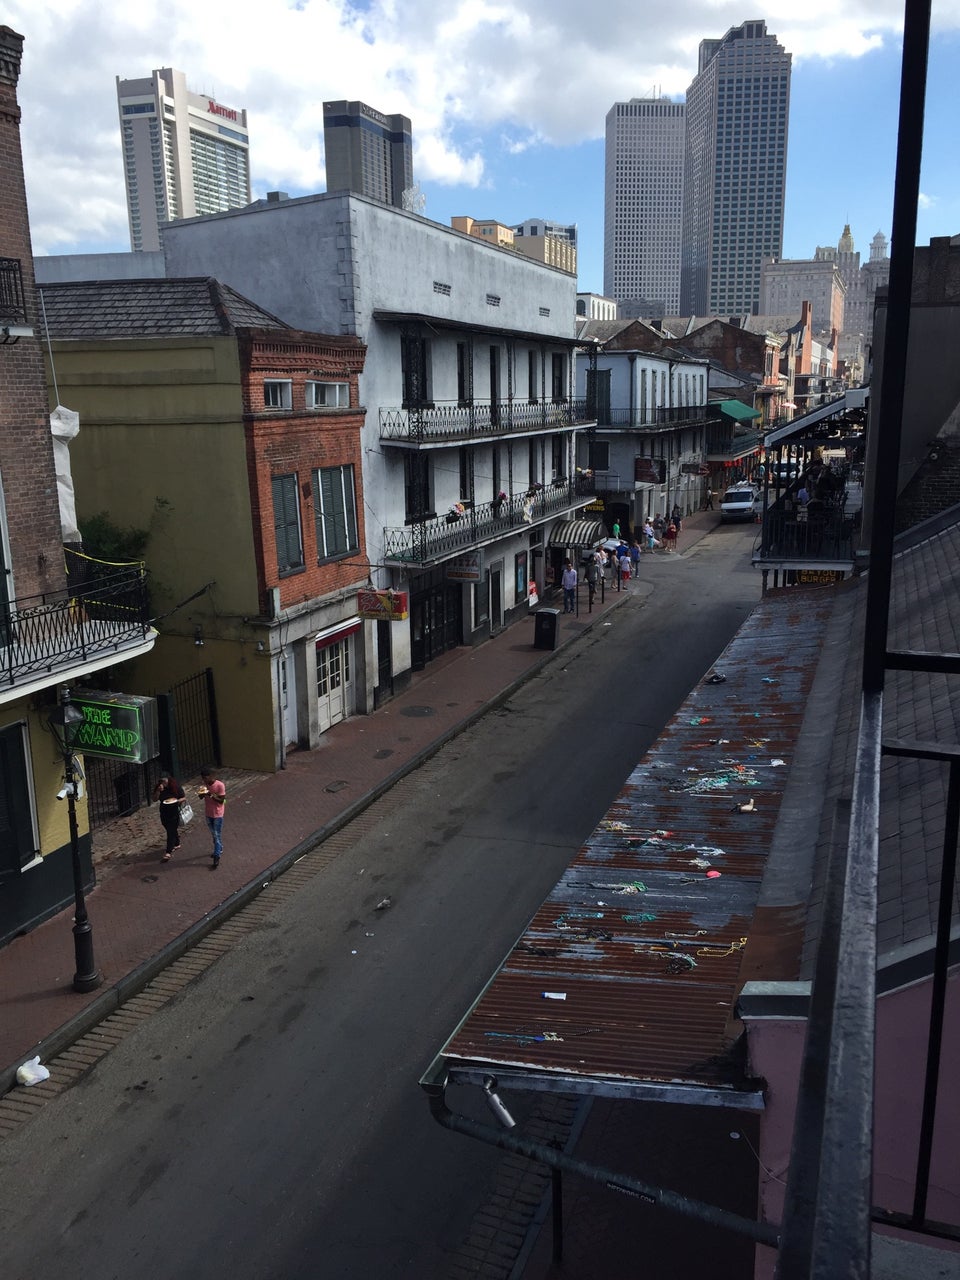 Photo of Four Points By Sheraton French Quarter